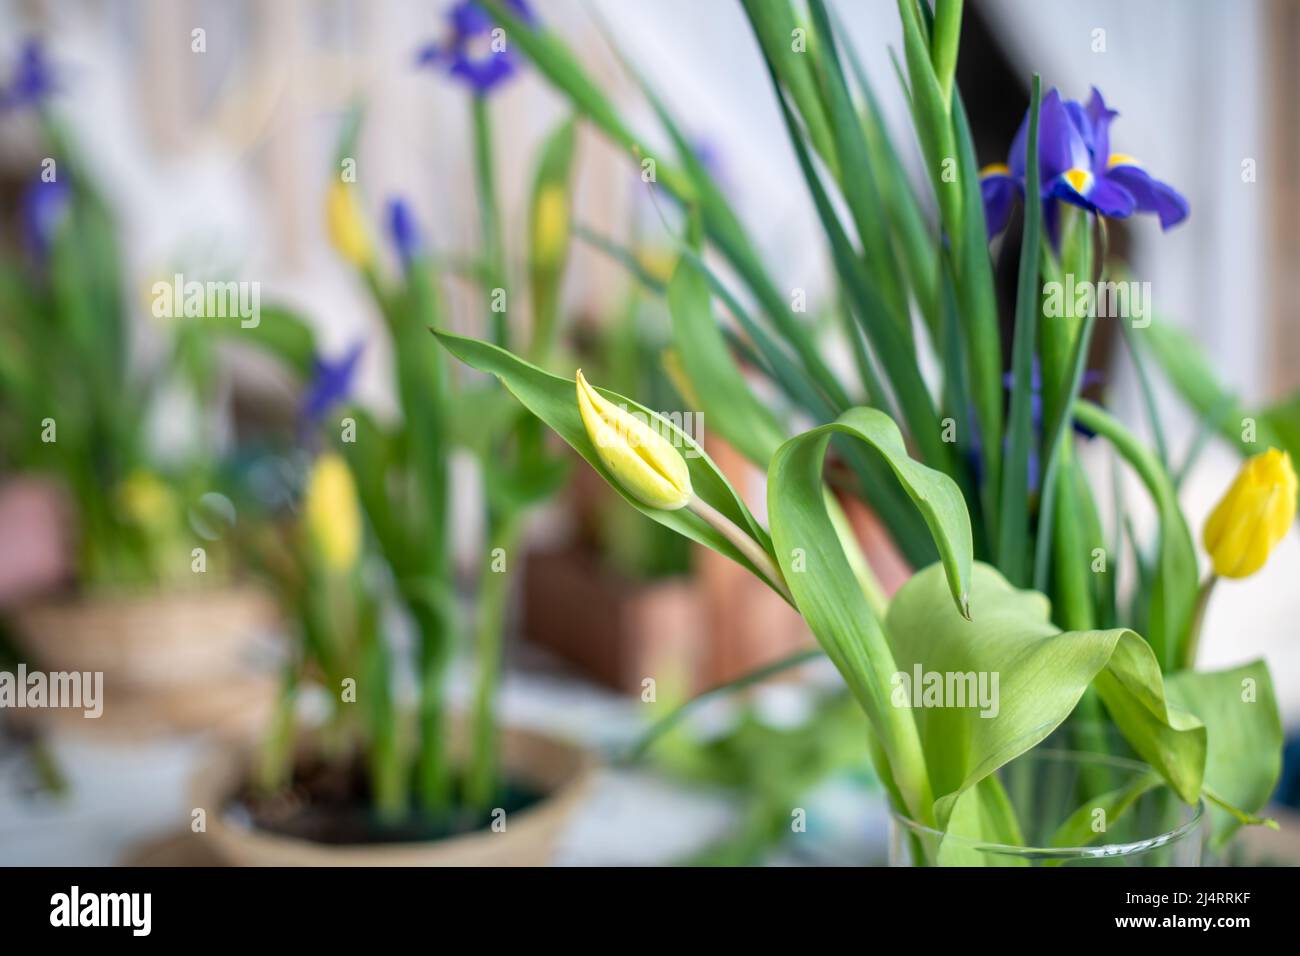 Elegant spring, Easter flower arrangements of irises, tulips, daffodils and willow branches, located on the table in daylight at home. Stock Photo